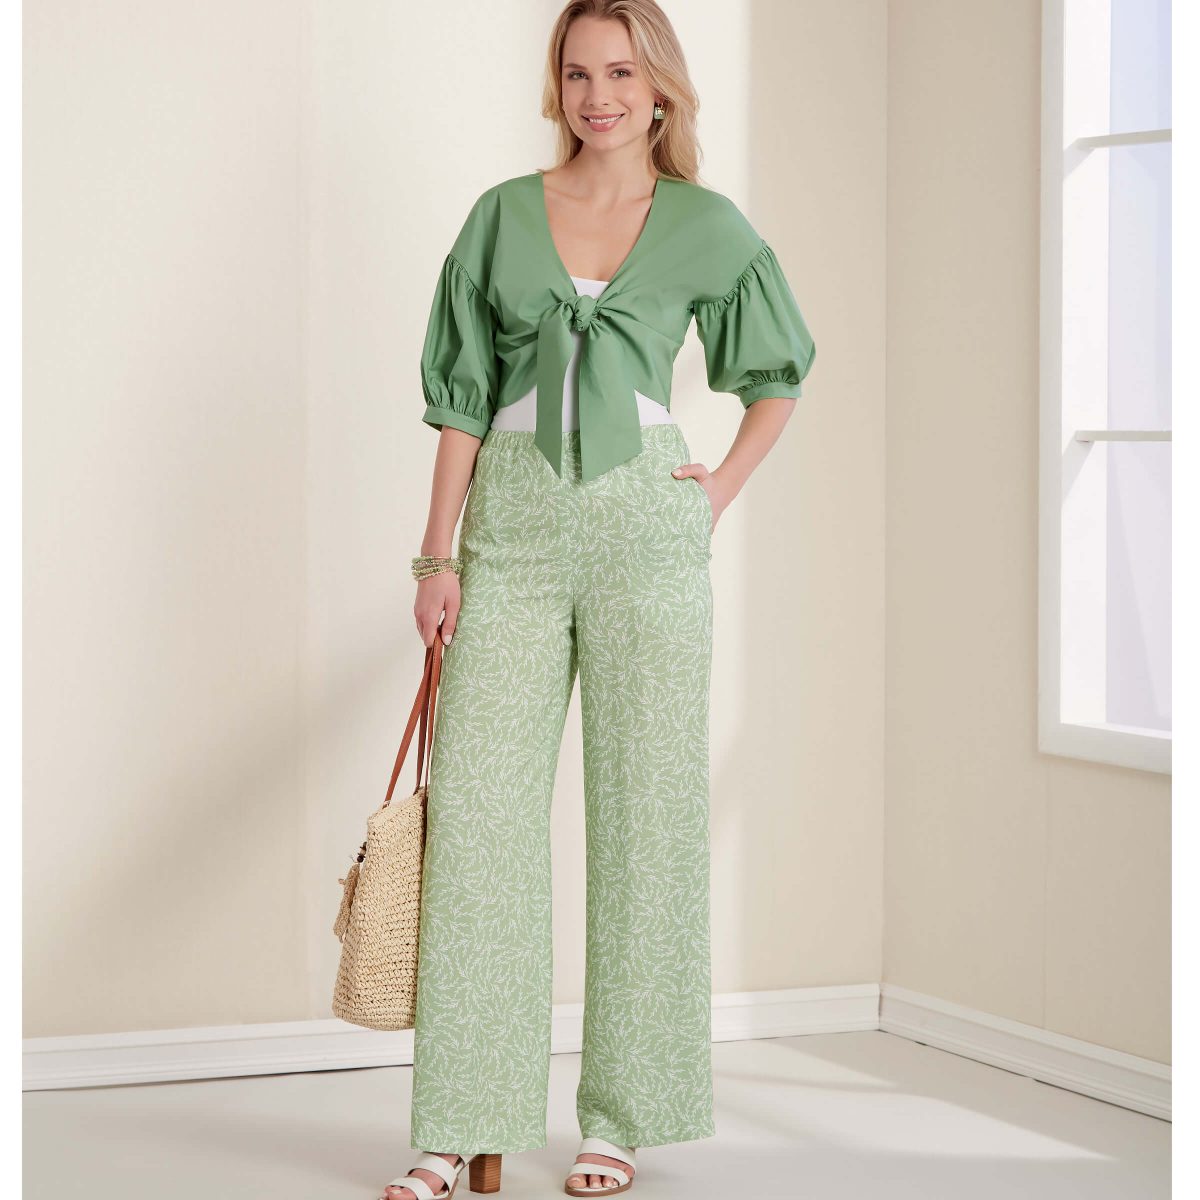 New Look Sewing Pattern N6677 Misses' Cropped Jacket & Trousers